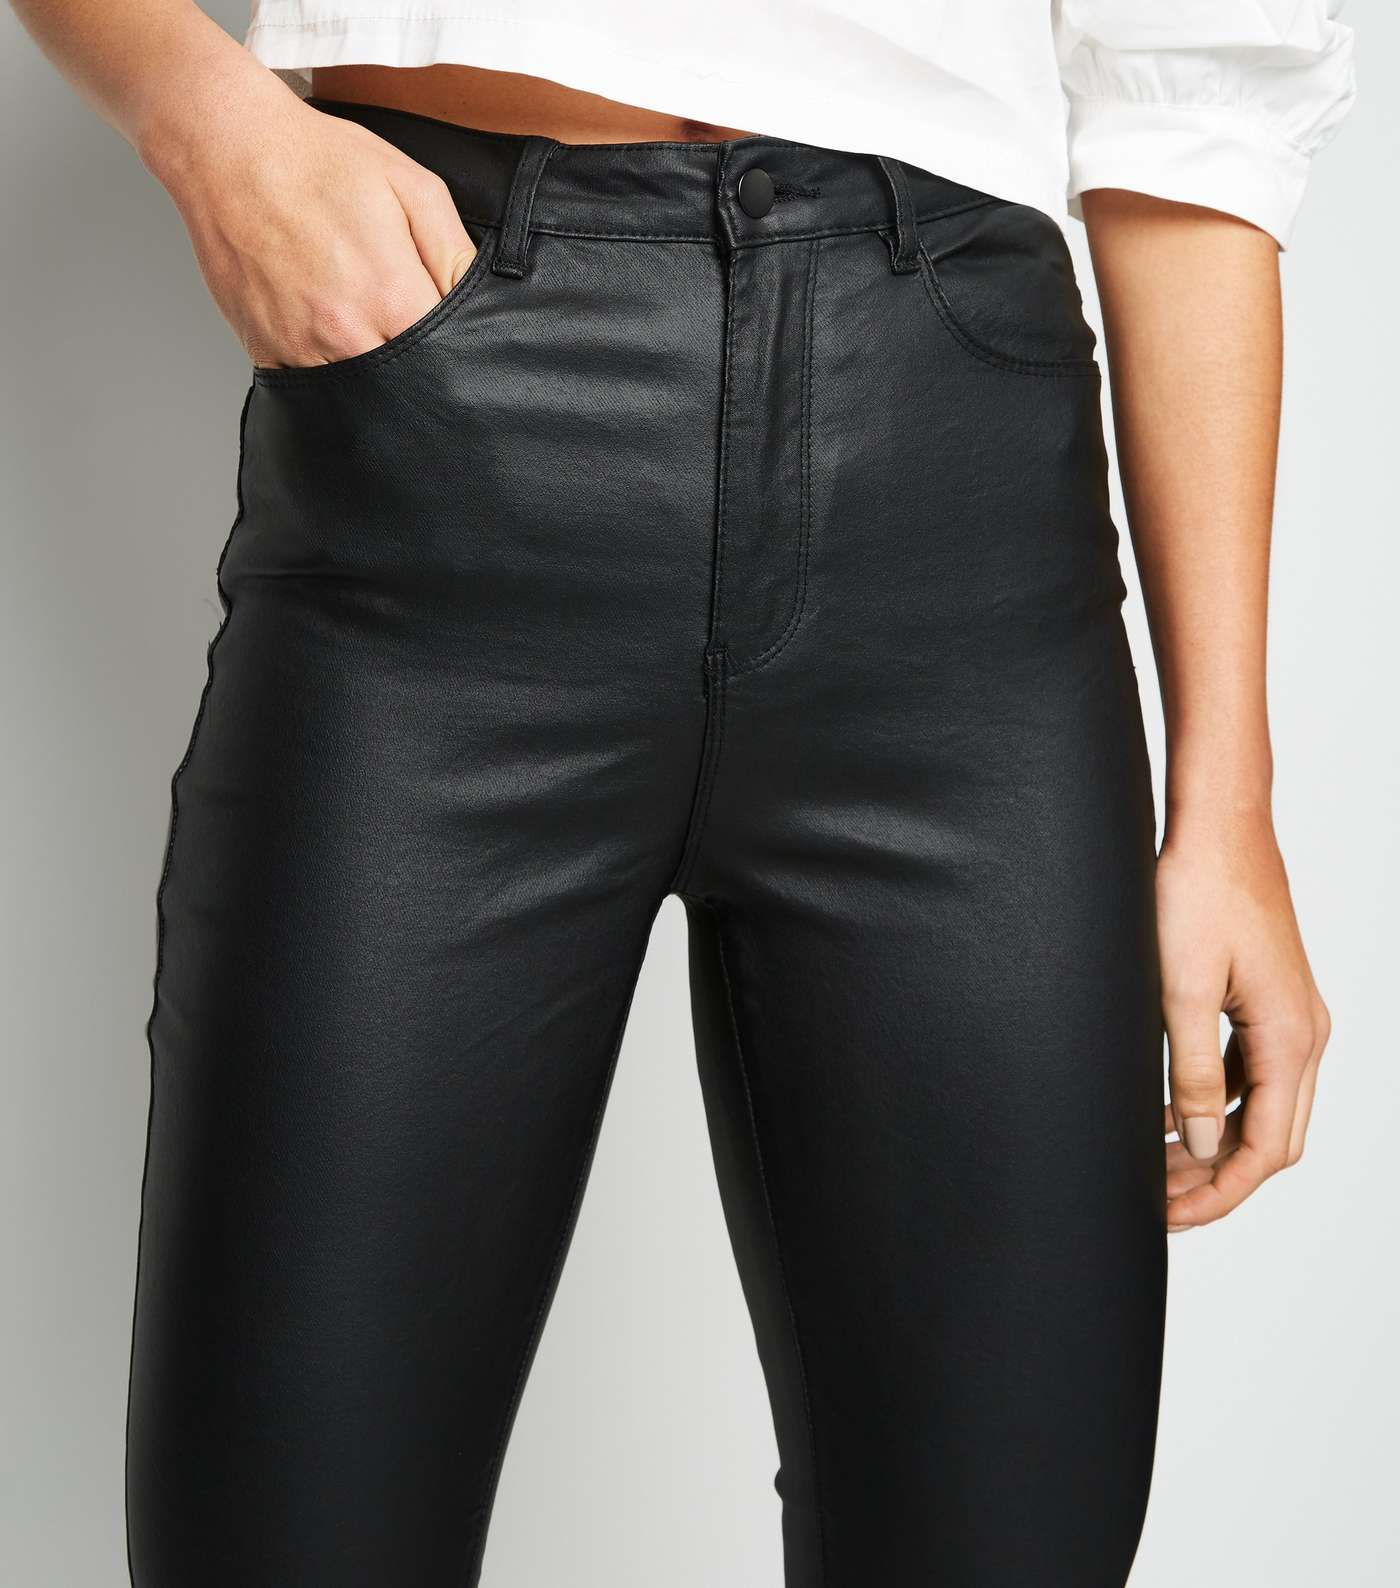 Urban Bliss Black Leather-Look Skinny Jeans  Image 5